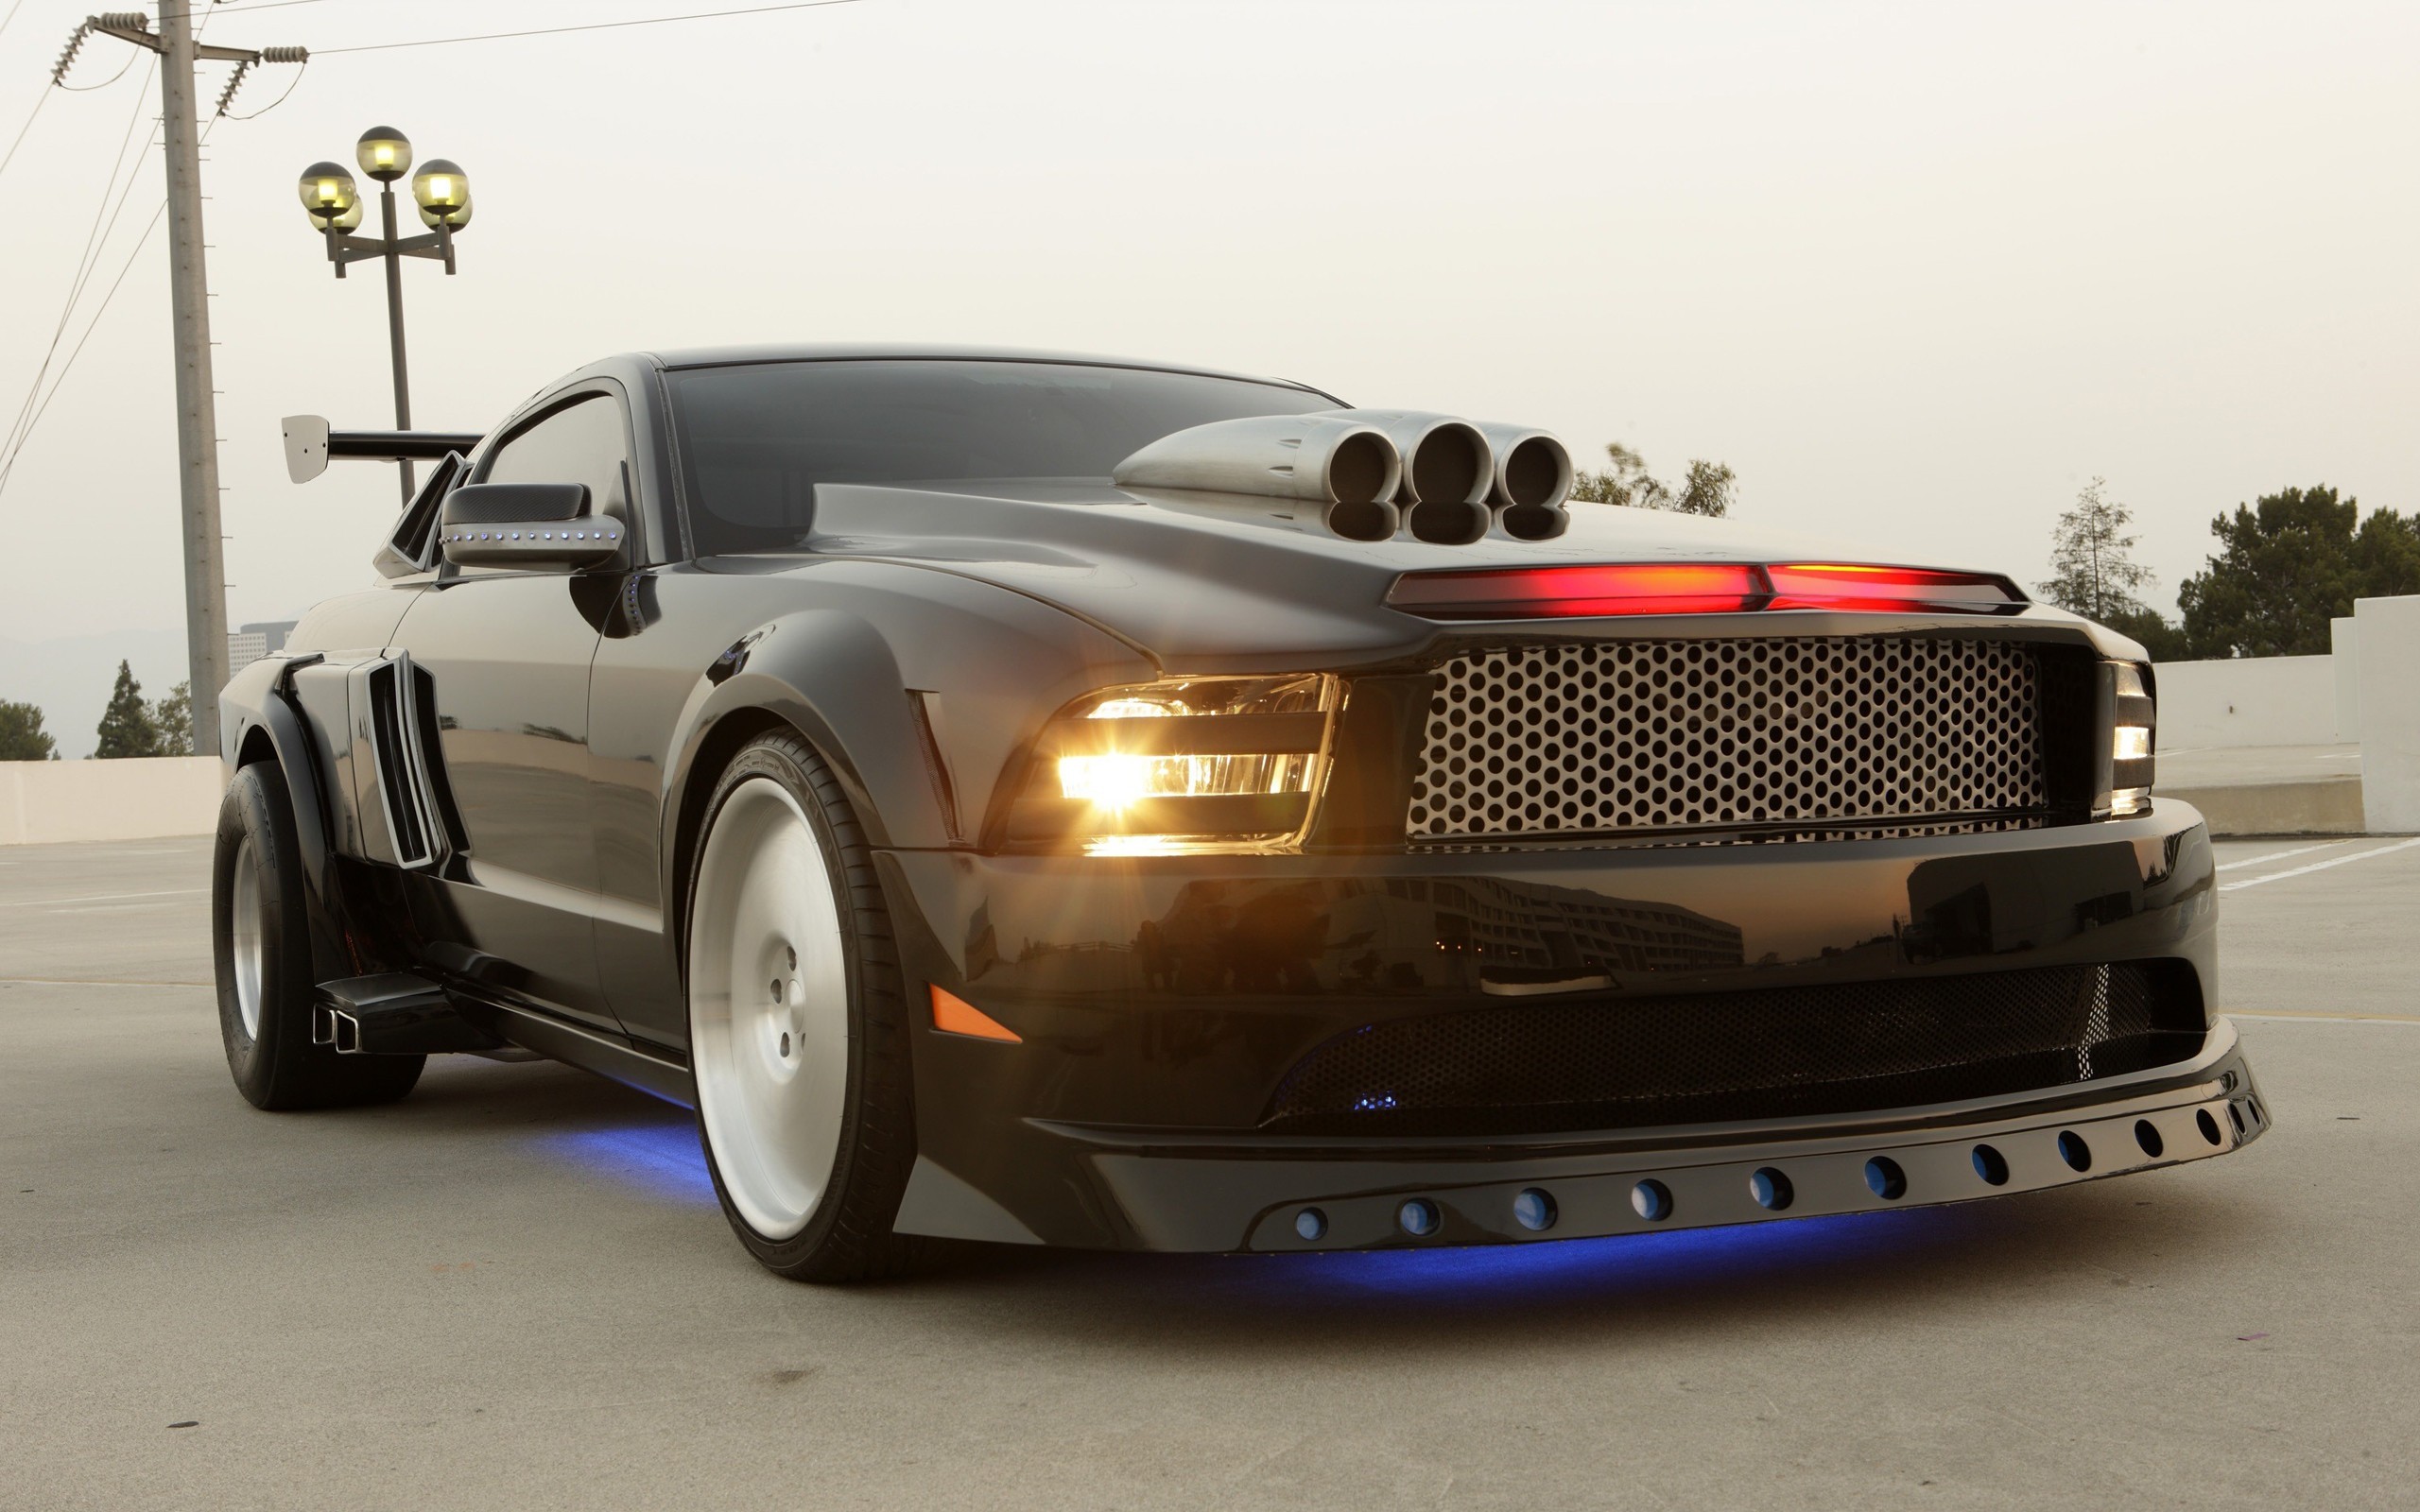 2560x1600 Ford >> Cars ford vehicles ford mustang shelby mustang ford shelby - Ford  Mustang Cobra Knight Rider